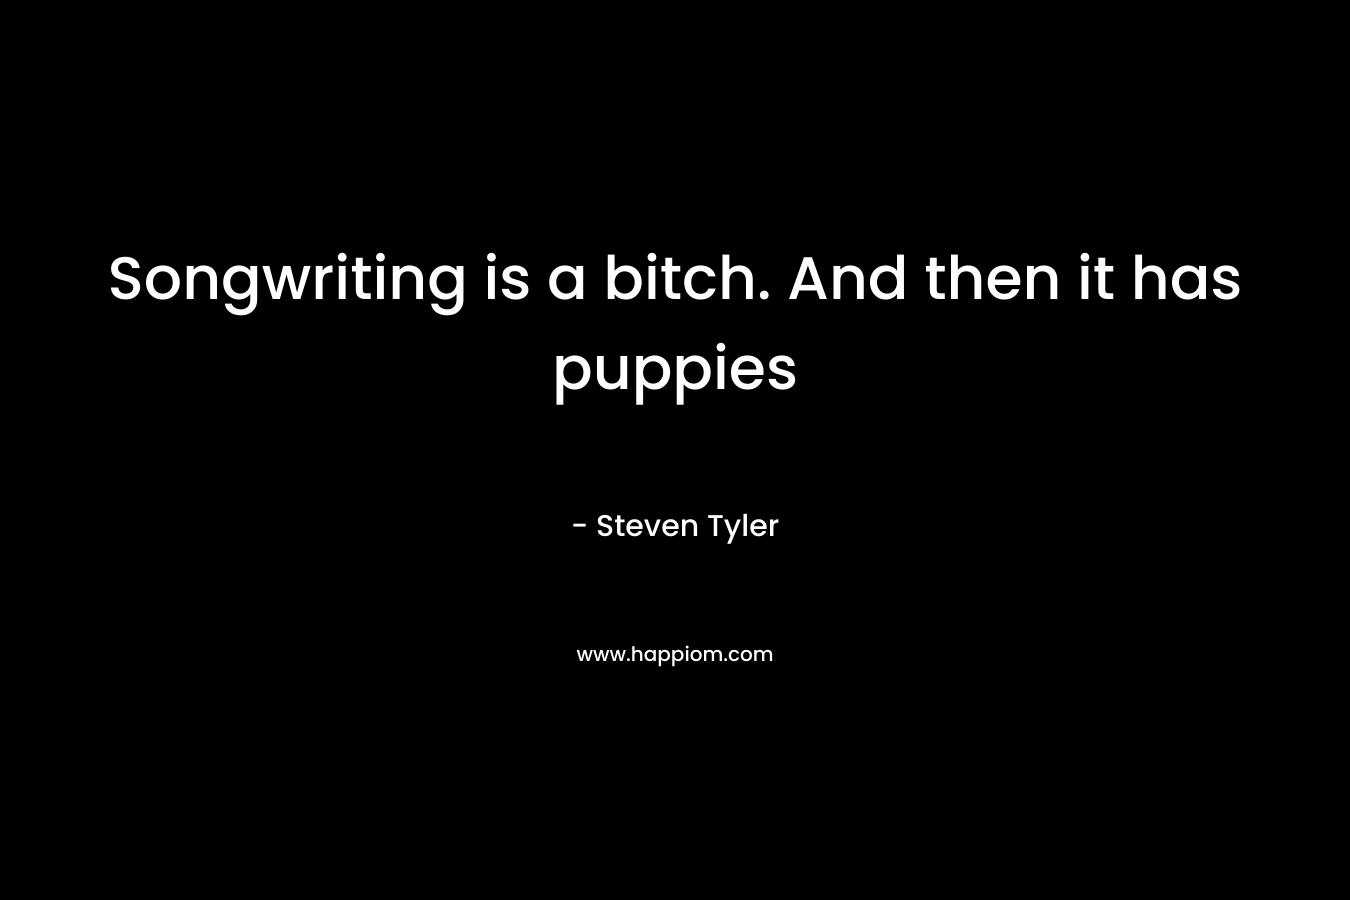 Songwriting is a bitch. And then it has puppies